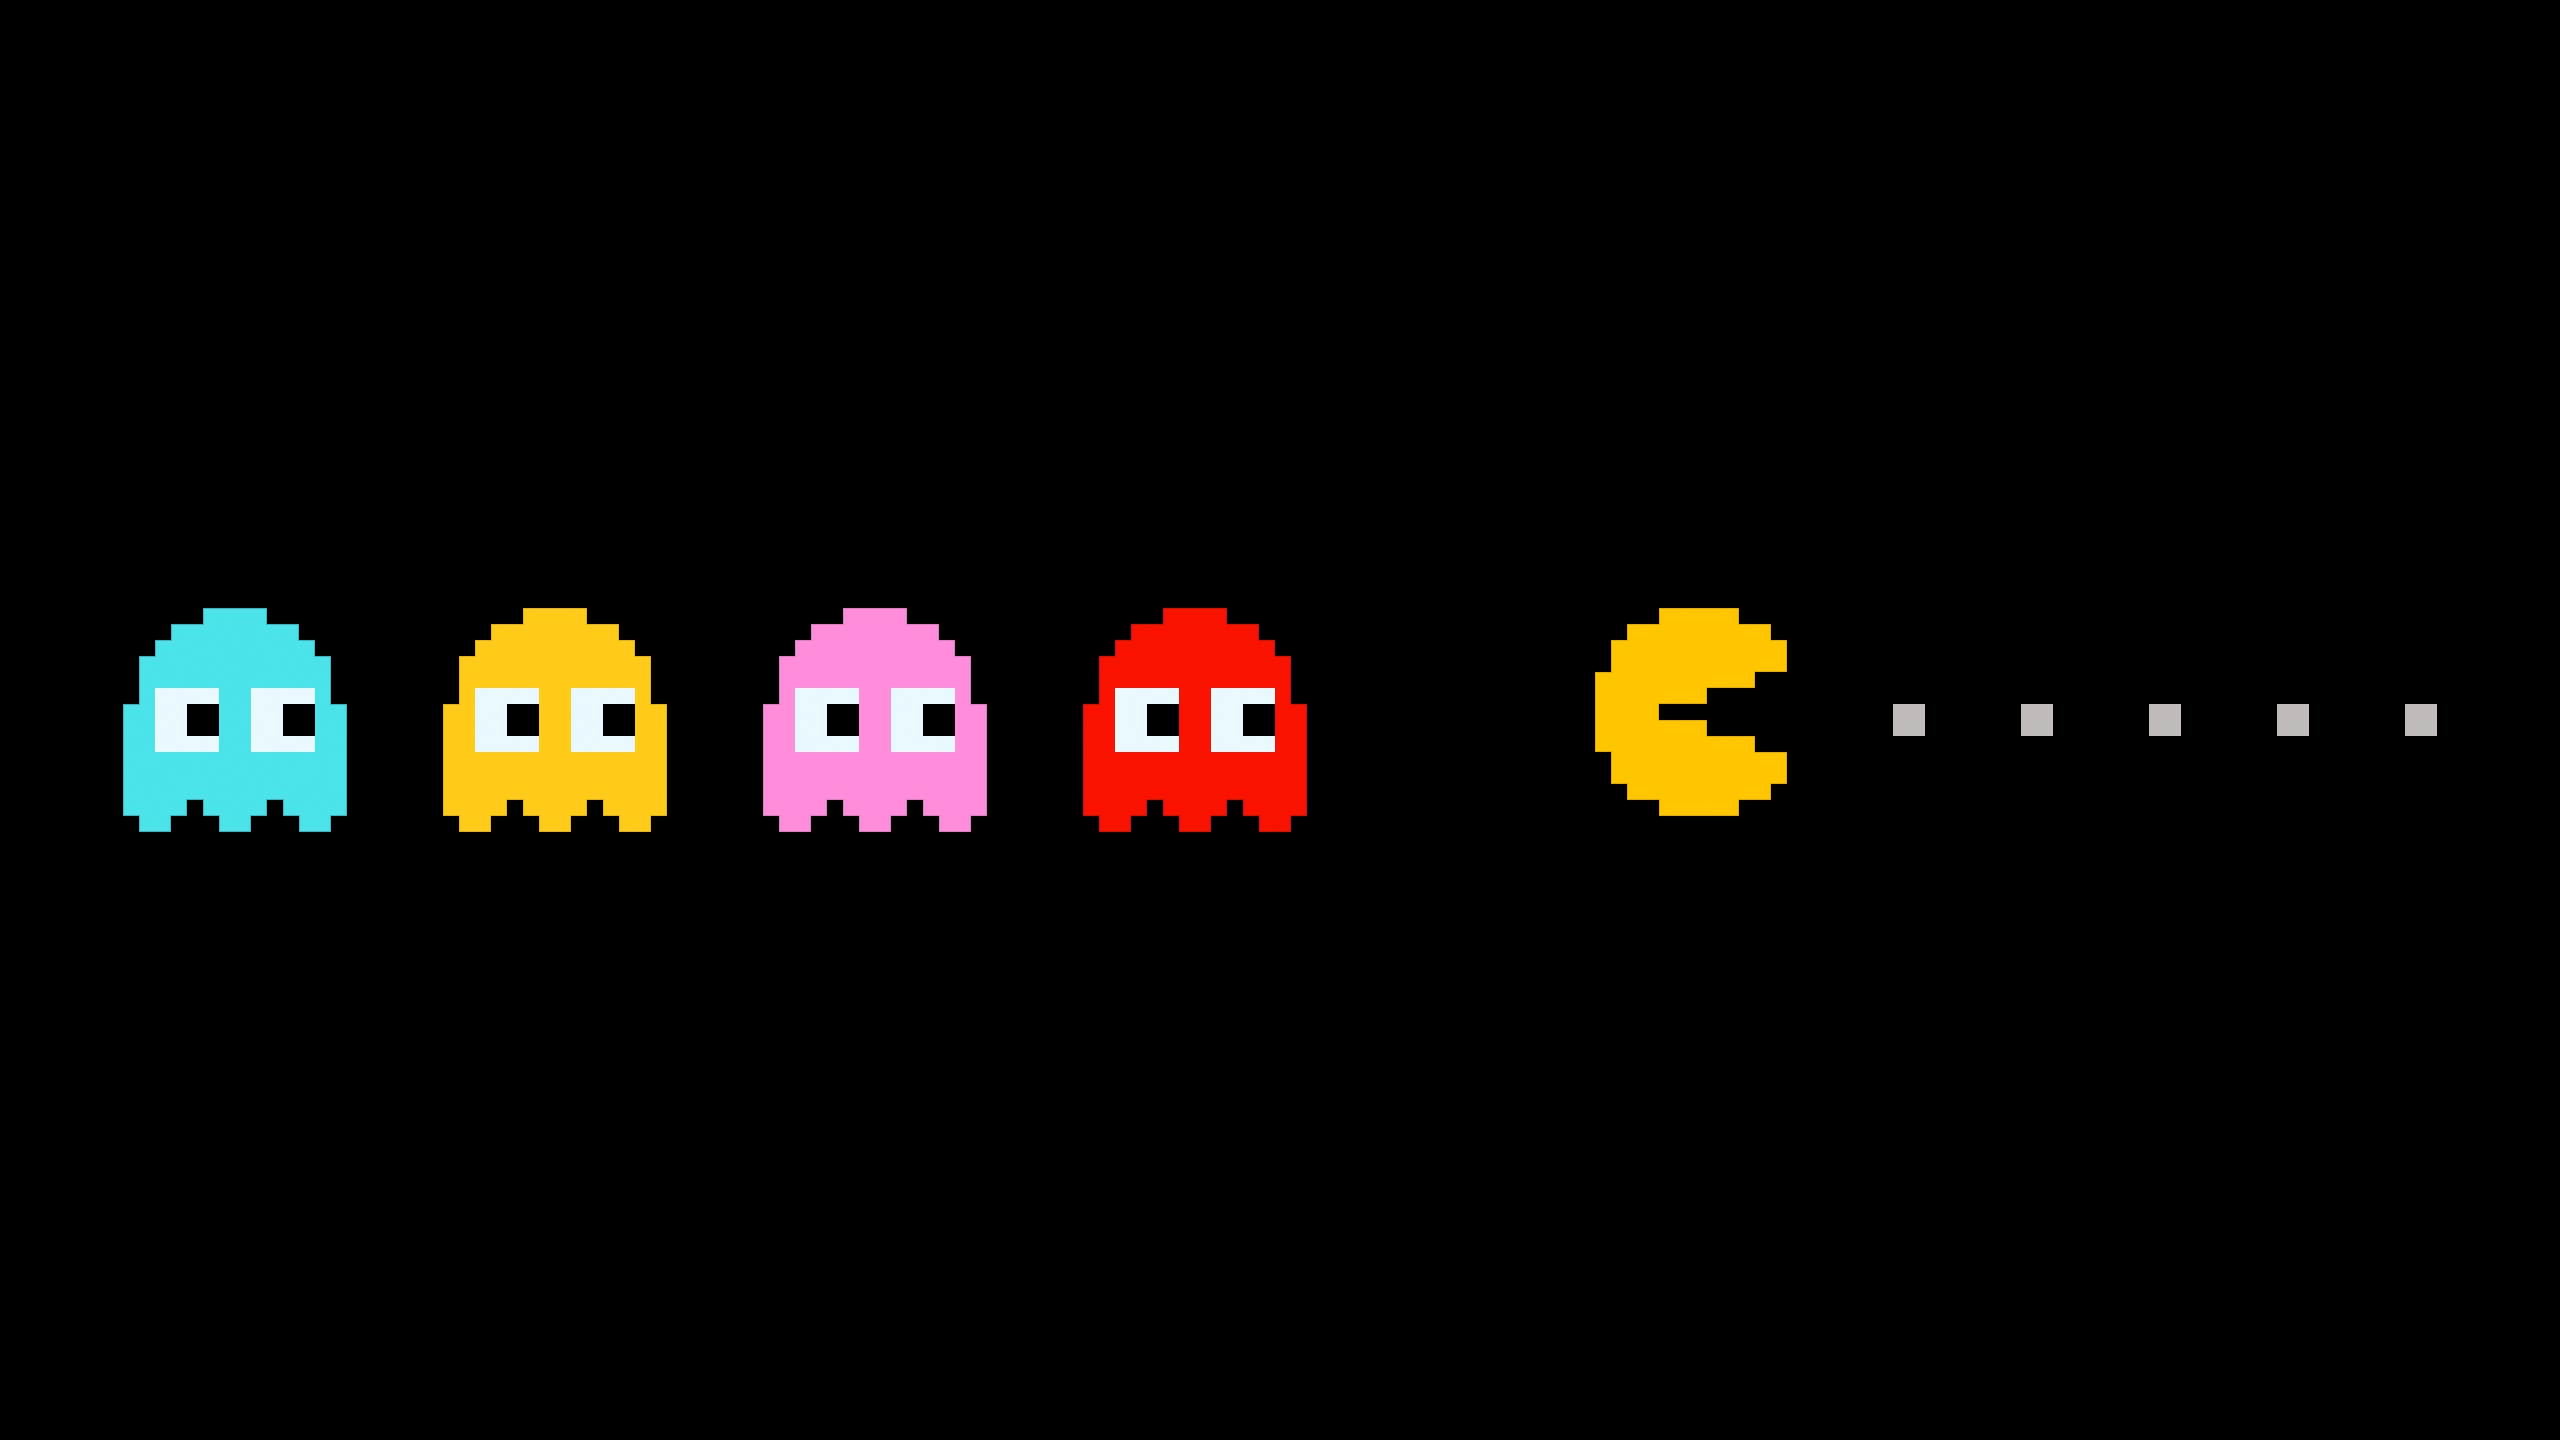 Pac Man Backgrounds